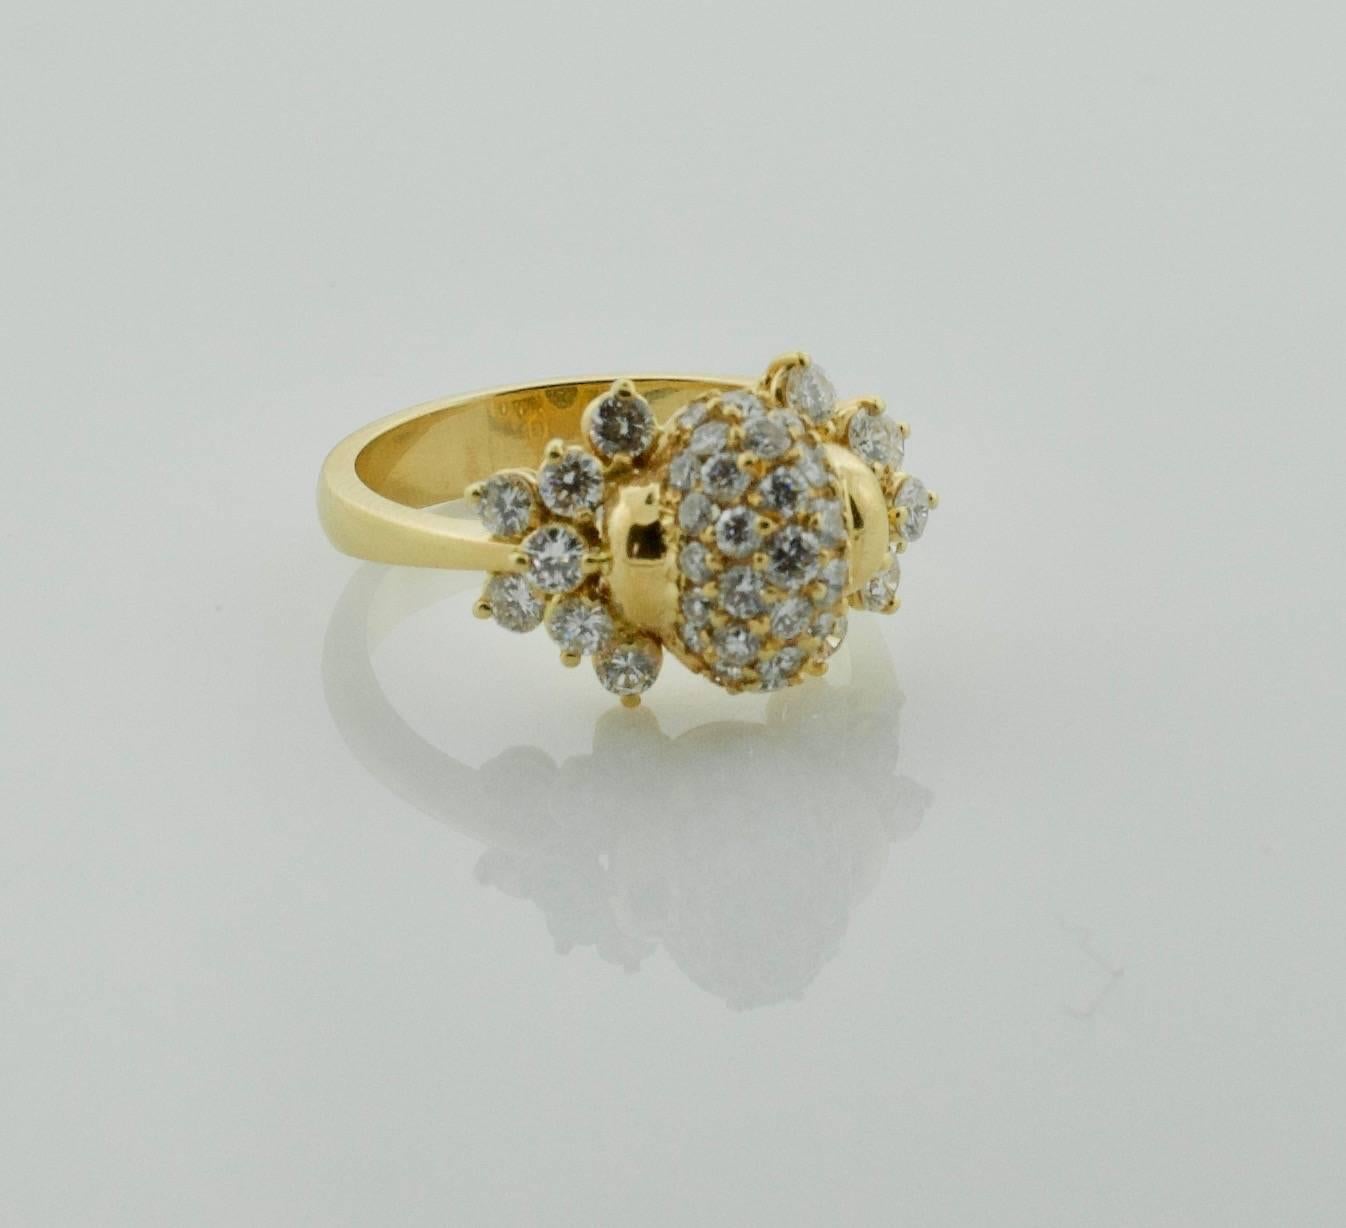 A Contemporary Diamond Ring in 18k Yellow Gold
Beautifully made with Fine Diamonds and Setting Work
Forty Nine Round Brilliant Cut Diamonds weighing 1.55 carats approximately GH VVS-VS
size 7